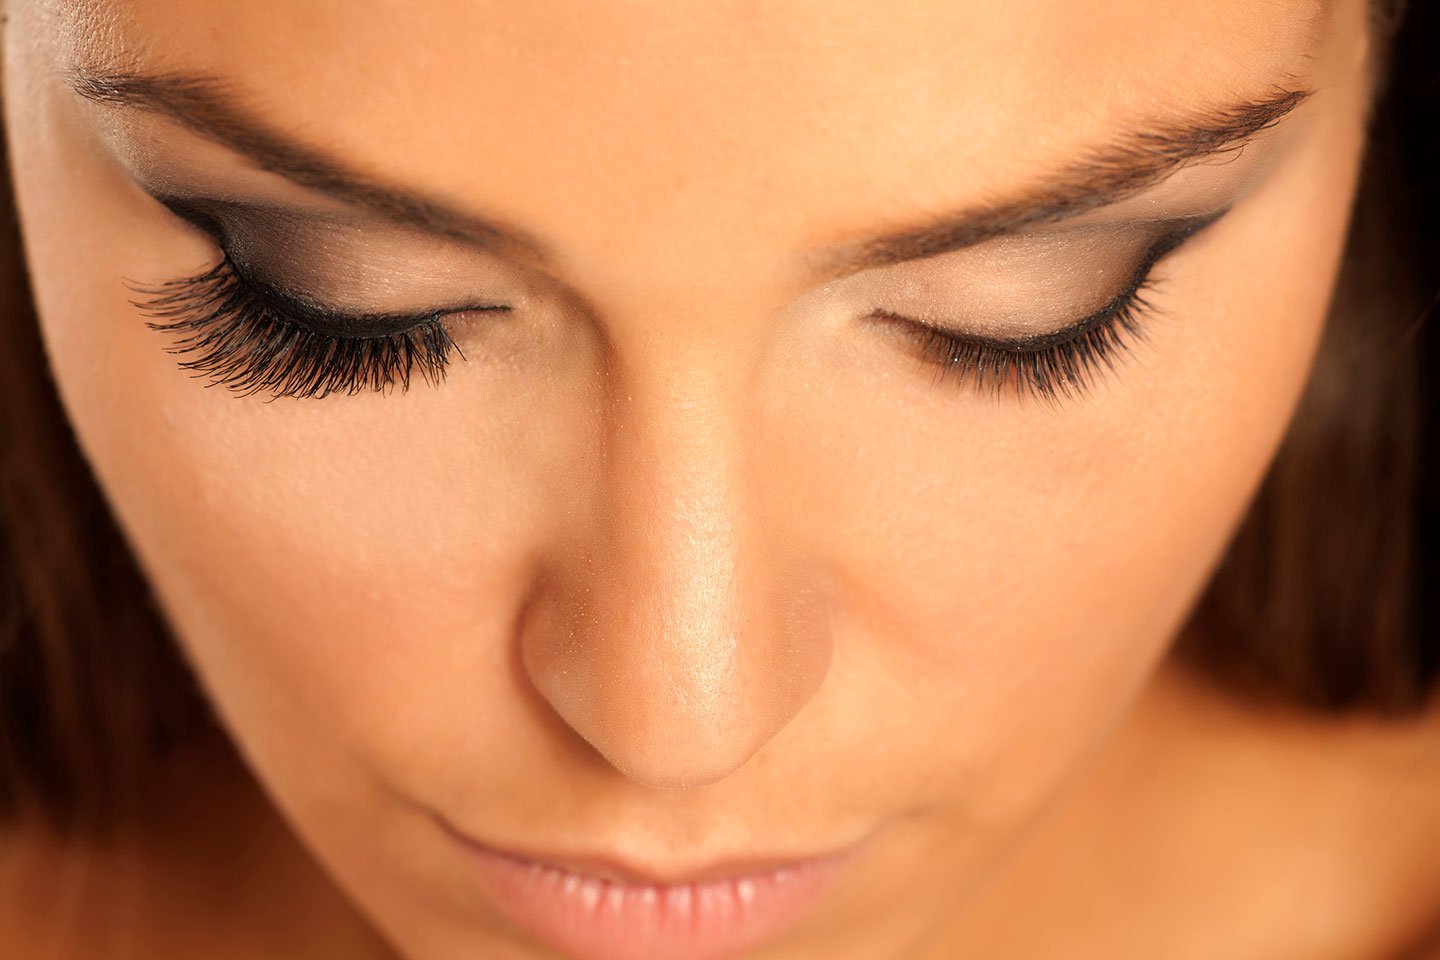 Things to Know Before Your Lash Extension Appointment